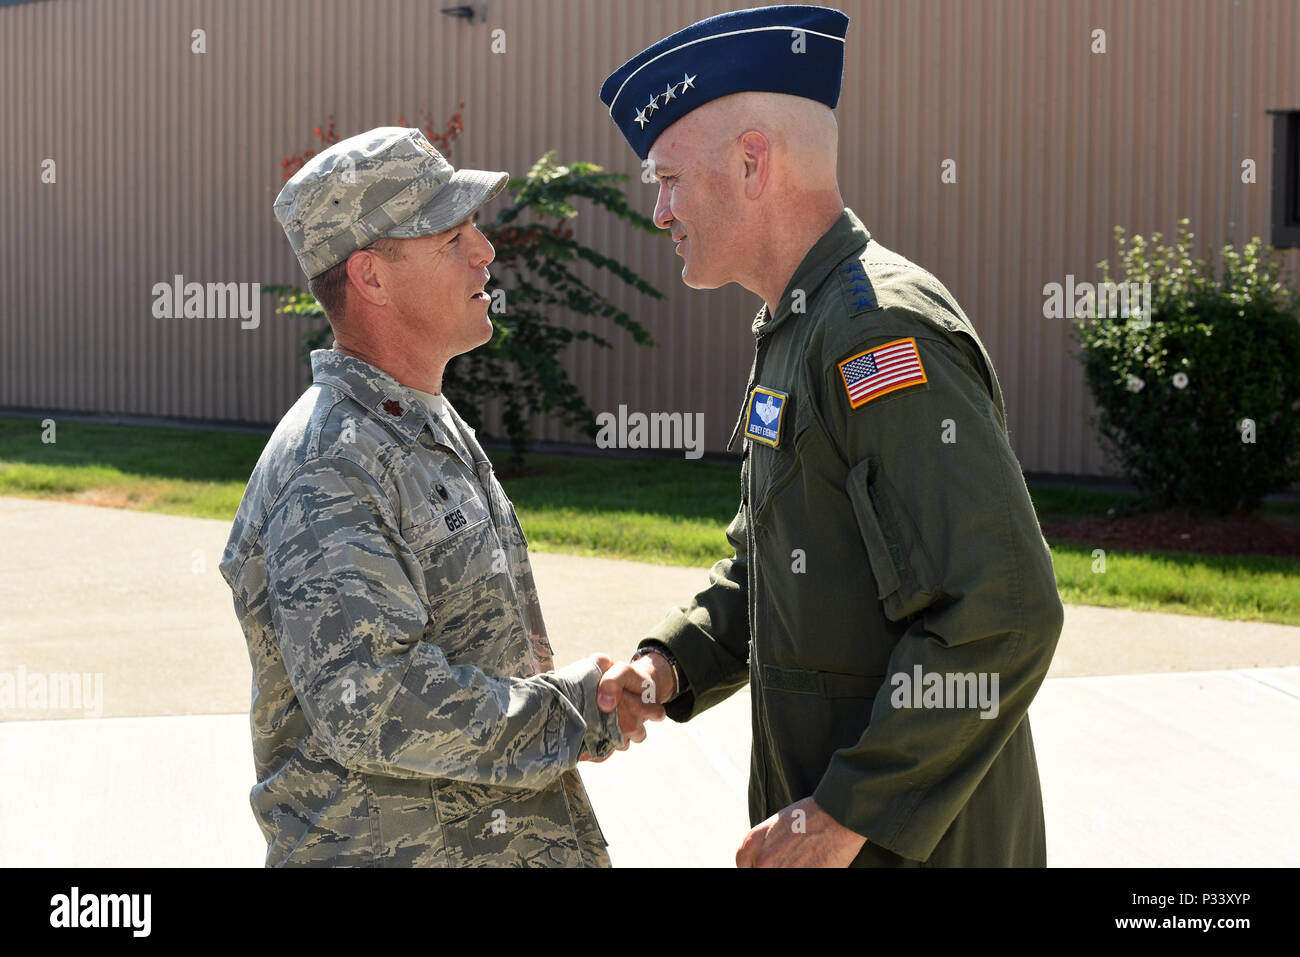 Gen. Carlton D. Everhart II, commander of Air Mobility Command, greets Maj. Geiss at Stewart Air National Guard Base during a visit with Airmen from the 105th Airlift Wing August 13, 2016. Everhart toured the different facilities at the base and met with Airmen of all ranks. (U.S. Air Force National Guard photo by Tech Sgt. Lee Guagenti) Stock Photo